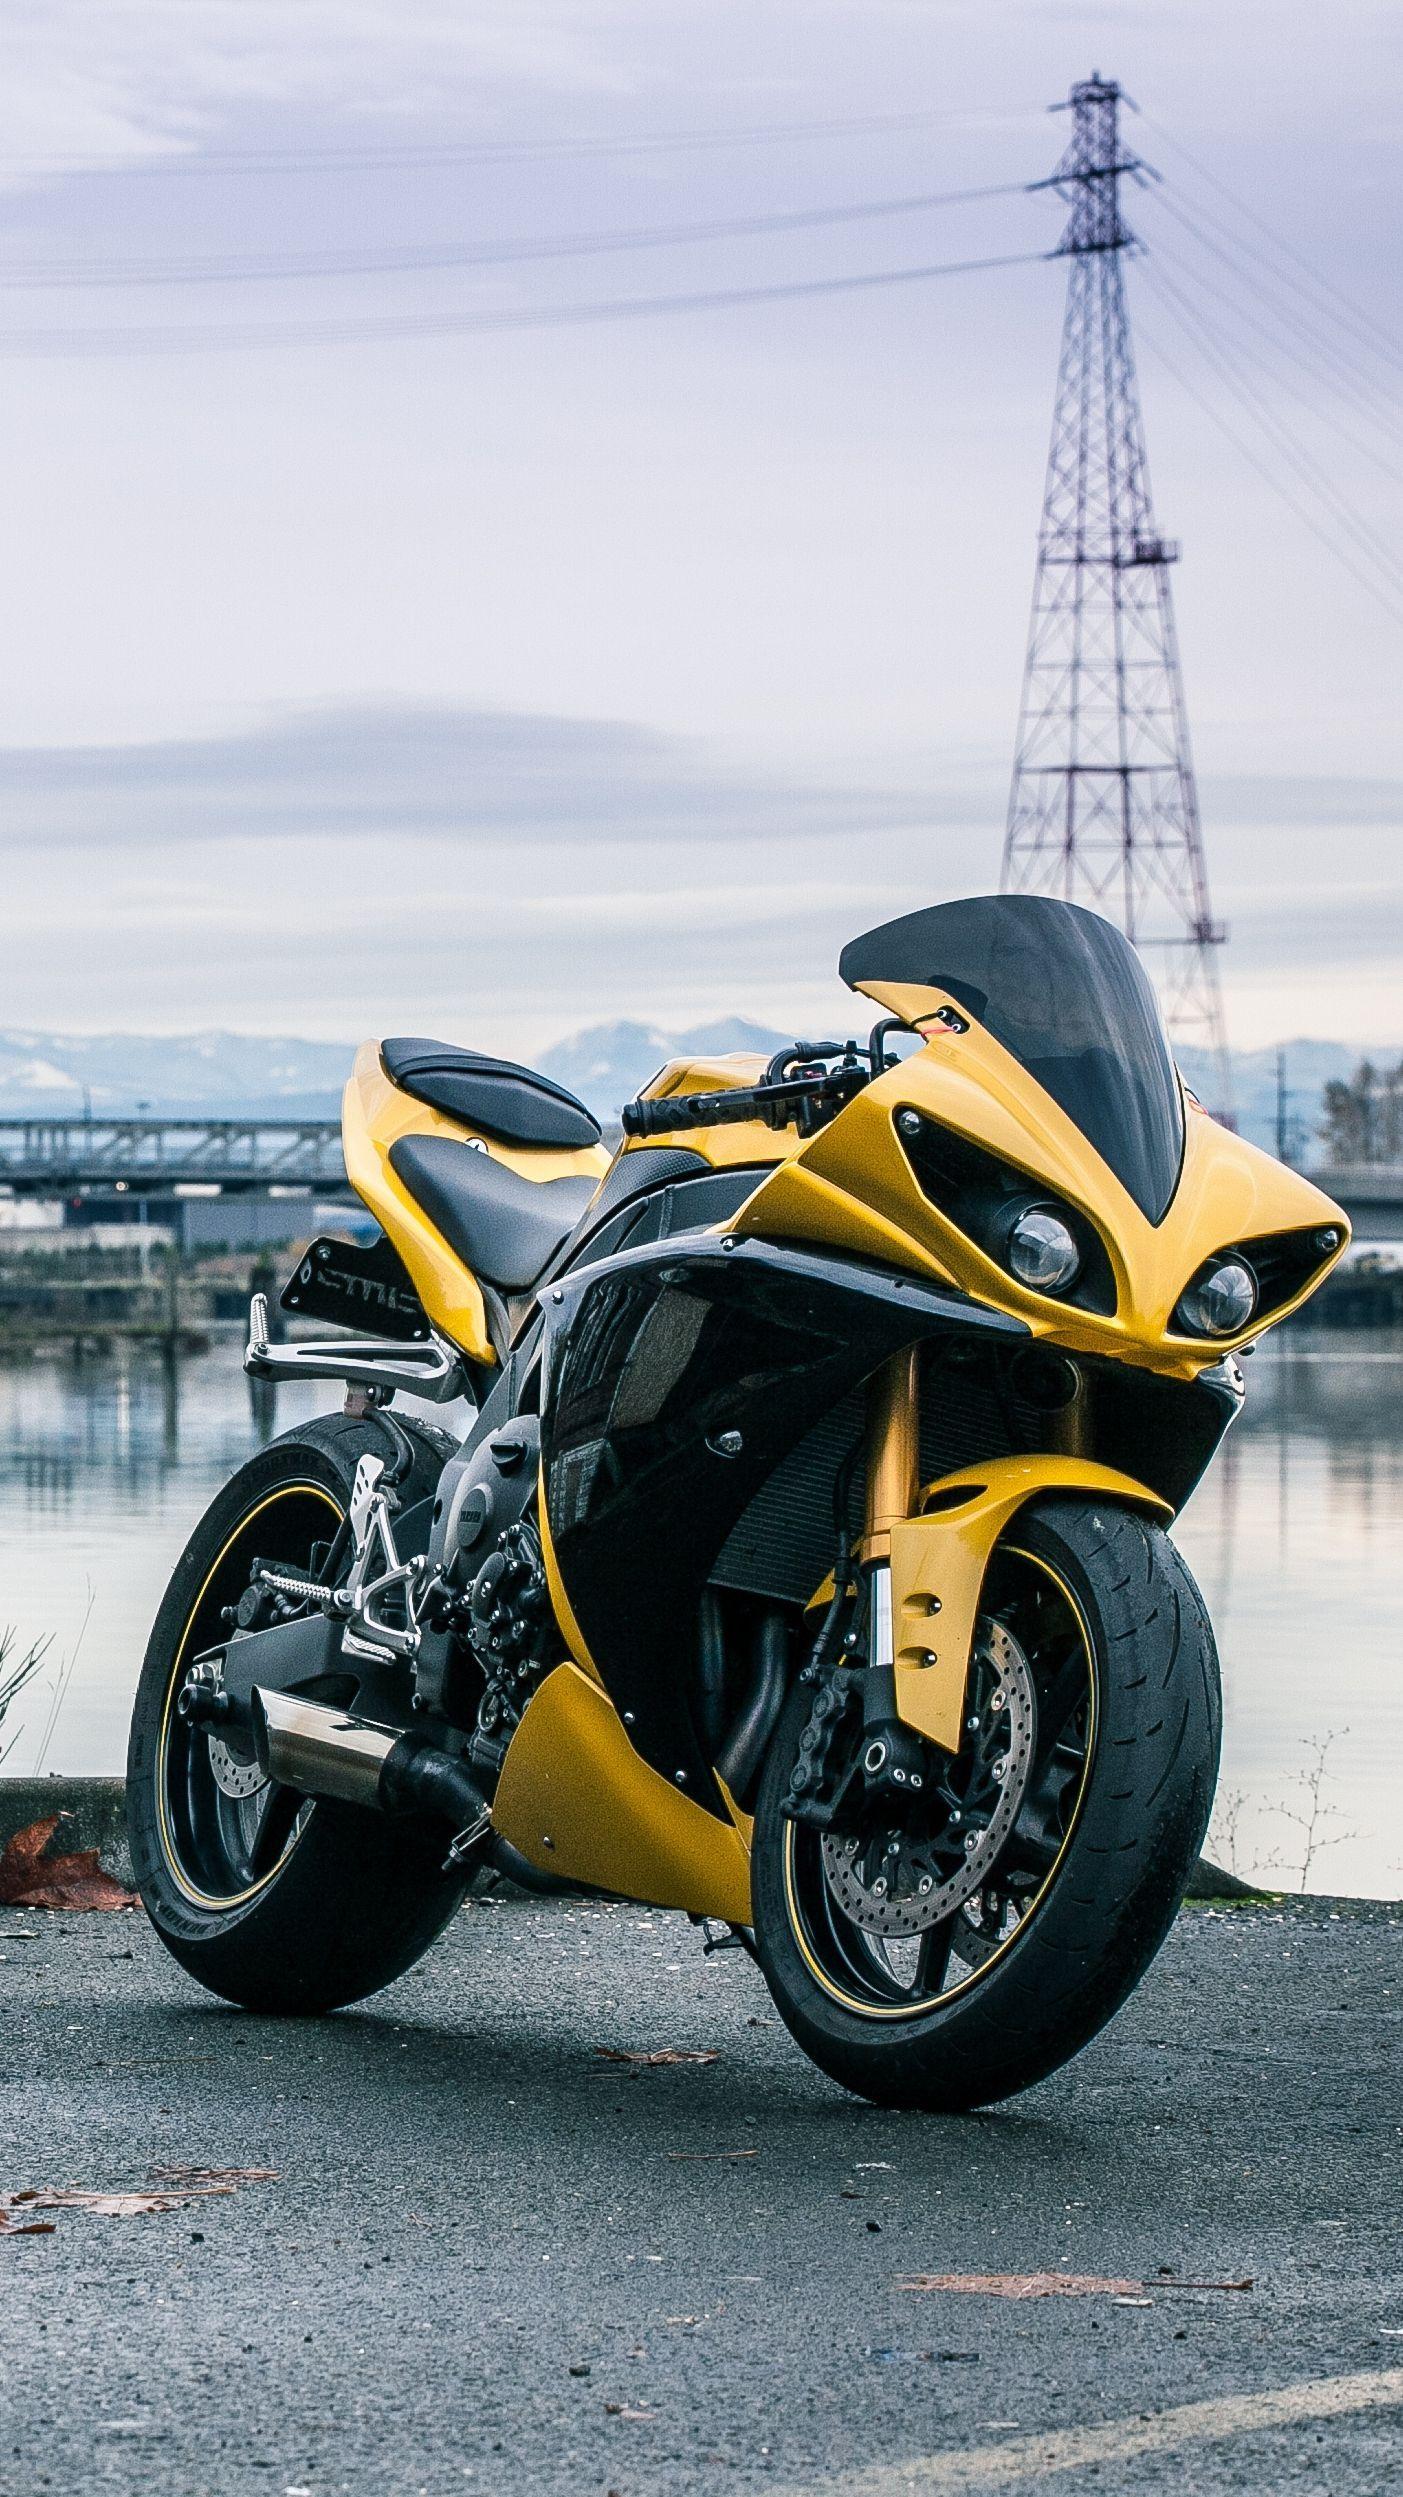 iPhone Wallpaper for iPhone iPhone 8 Plus, iPhone 6s, iPhone 6s Plus, iPhone X and iPod Touch High Quality Wallpaper. Yamaha r Yamaha, Motorcycle wallpaper